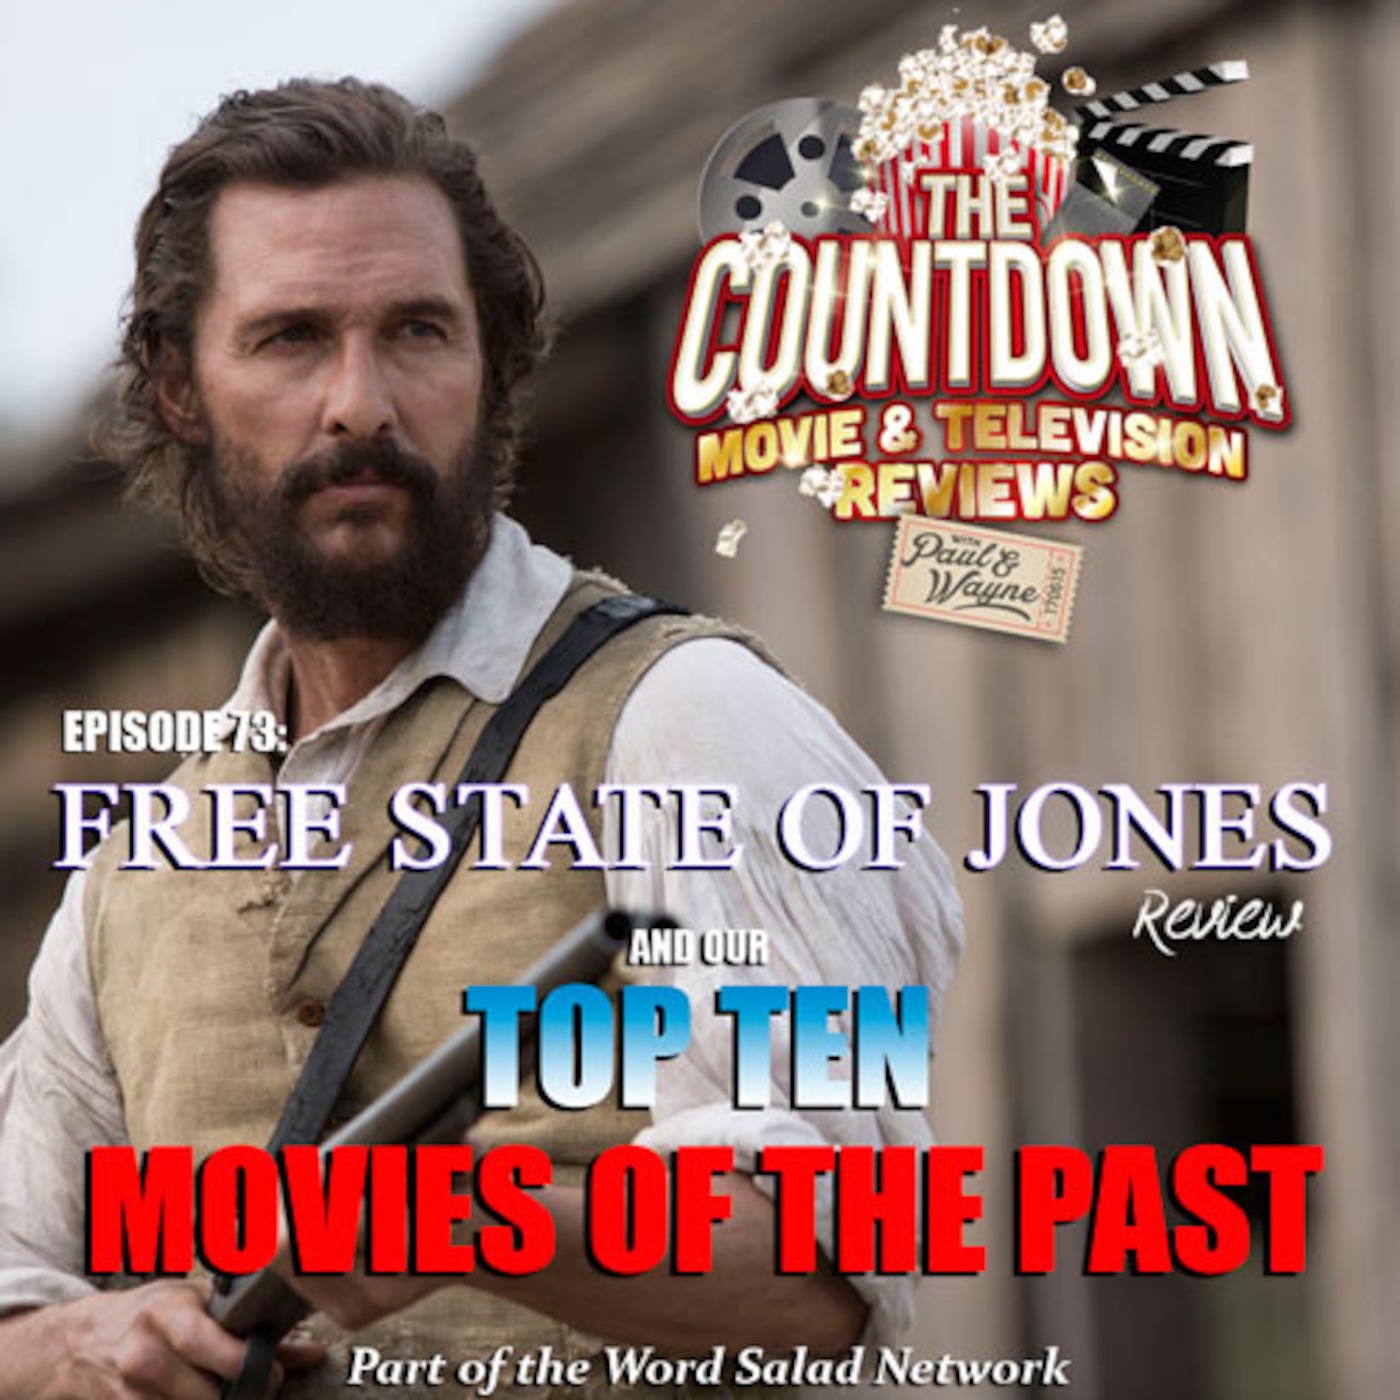 Episode 73: Top 10 Films Set in the Past / Free State of Jones